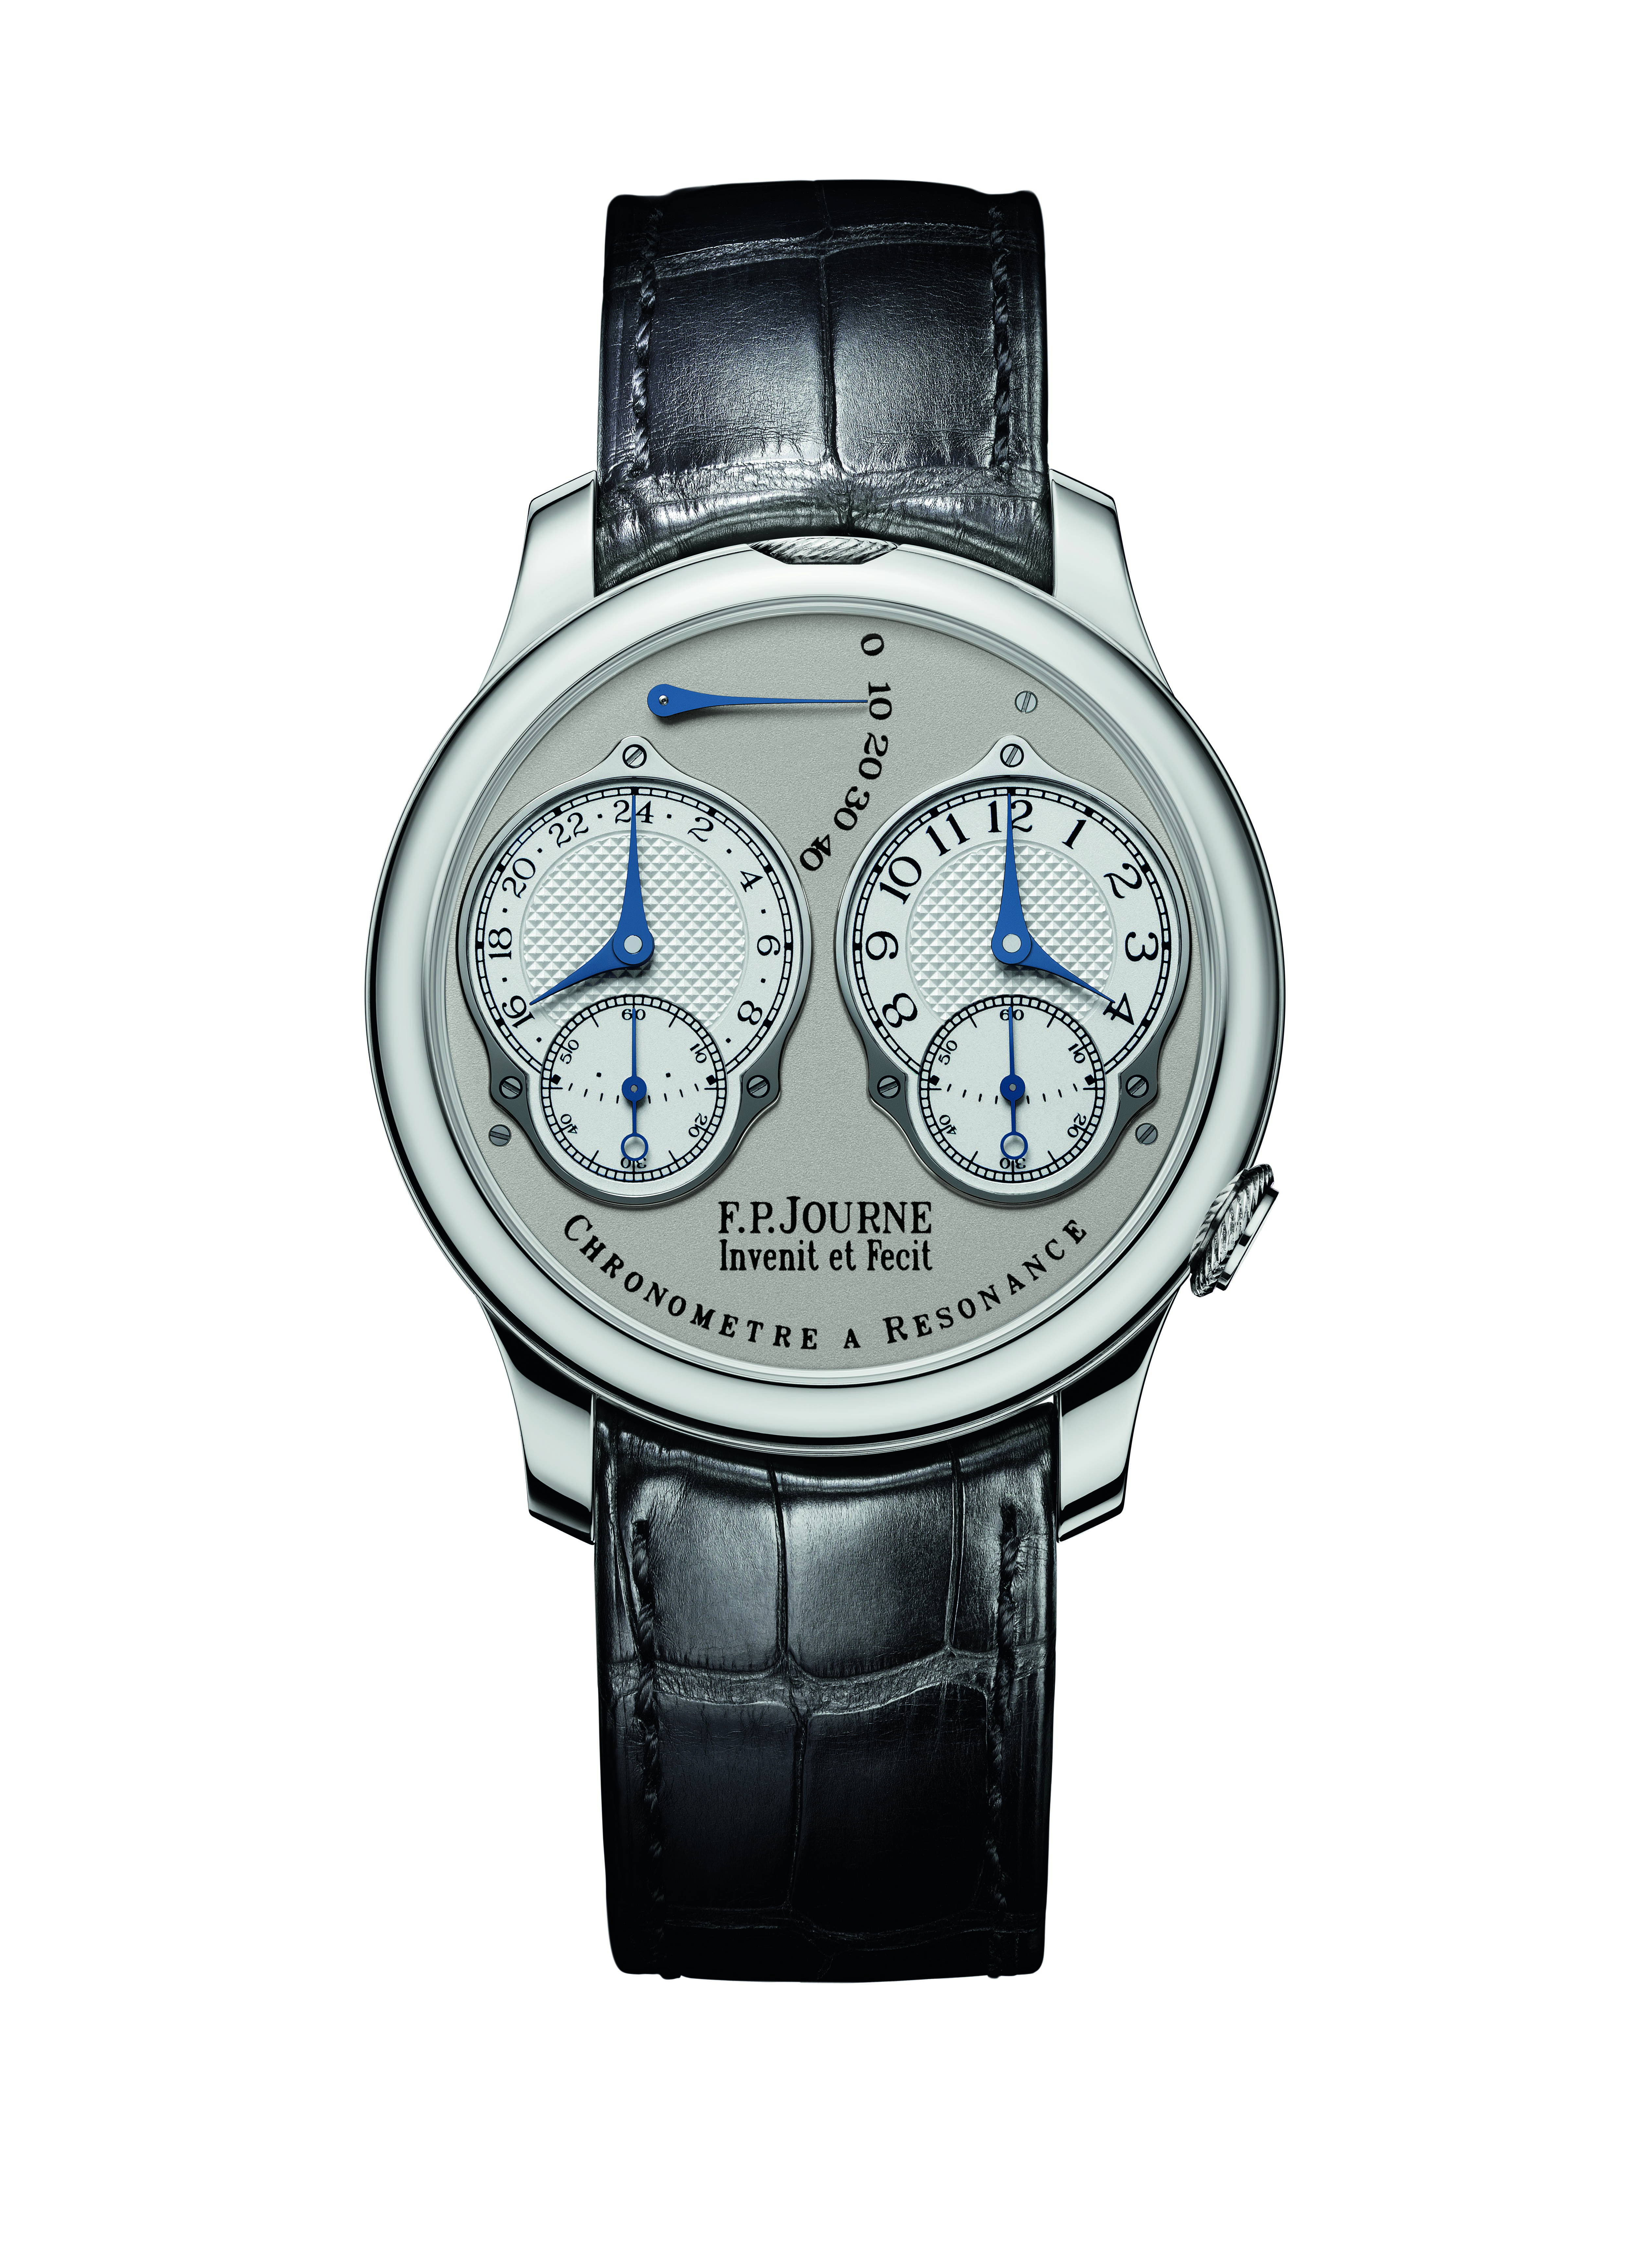 News: F.P. Journe Releases a 4th Generation Resonance Dial